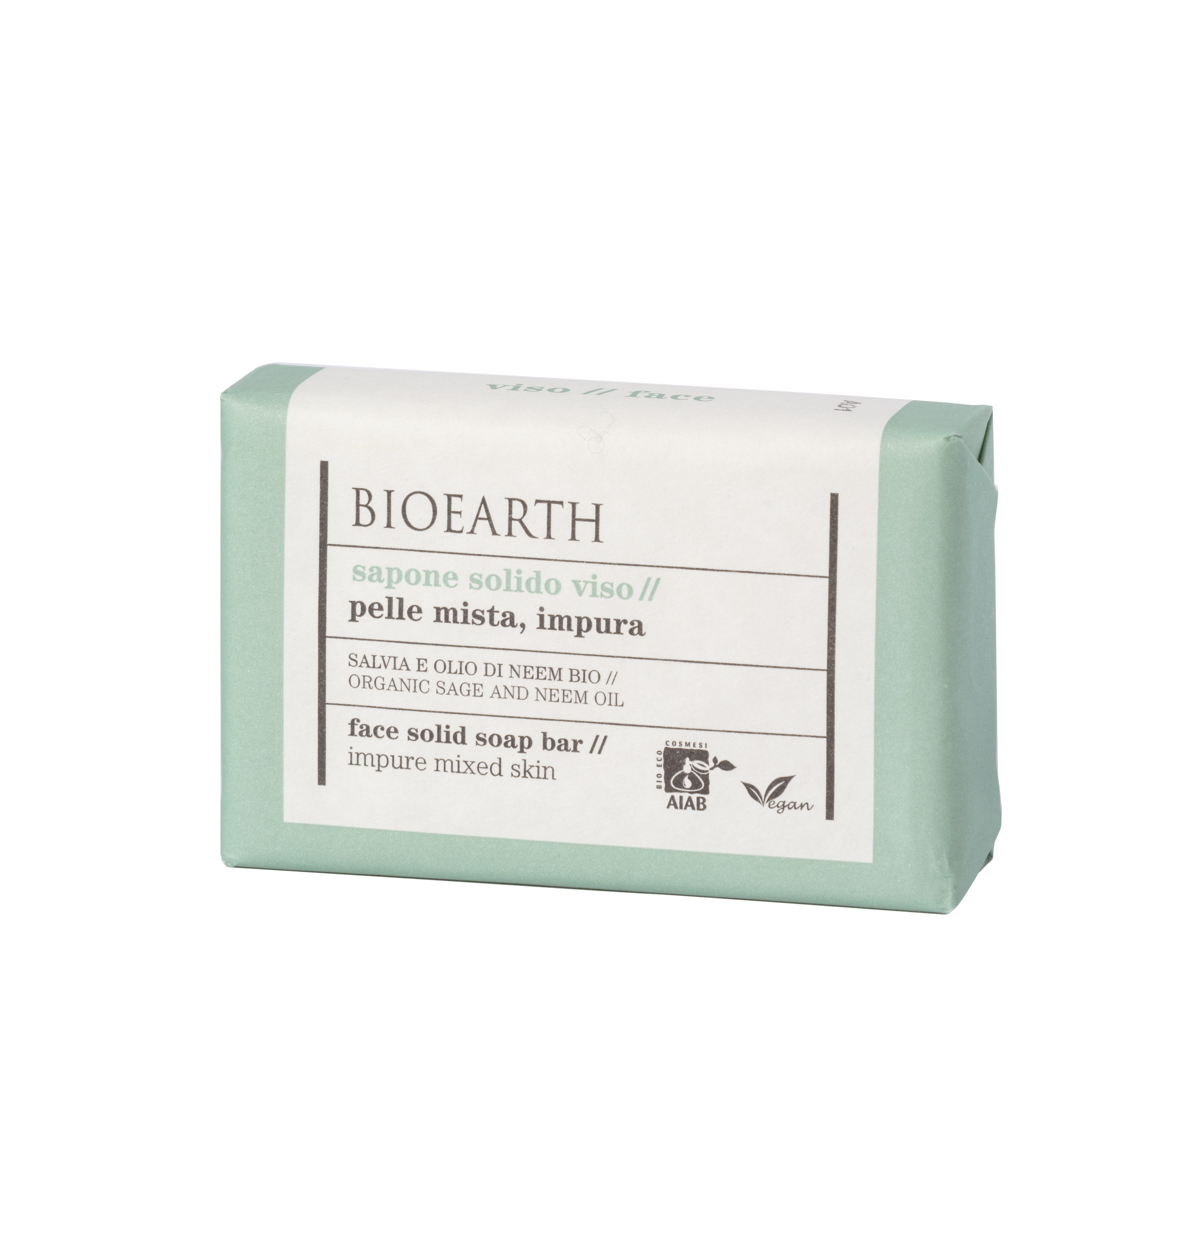 Bioearth - Solid Soaps Face Solid Soap - Organic Sage And Neem Oil - 150g